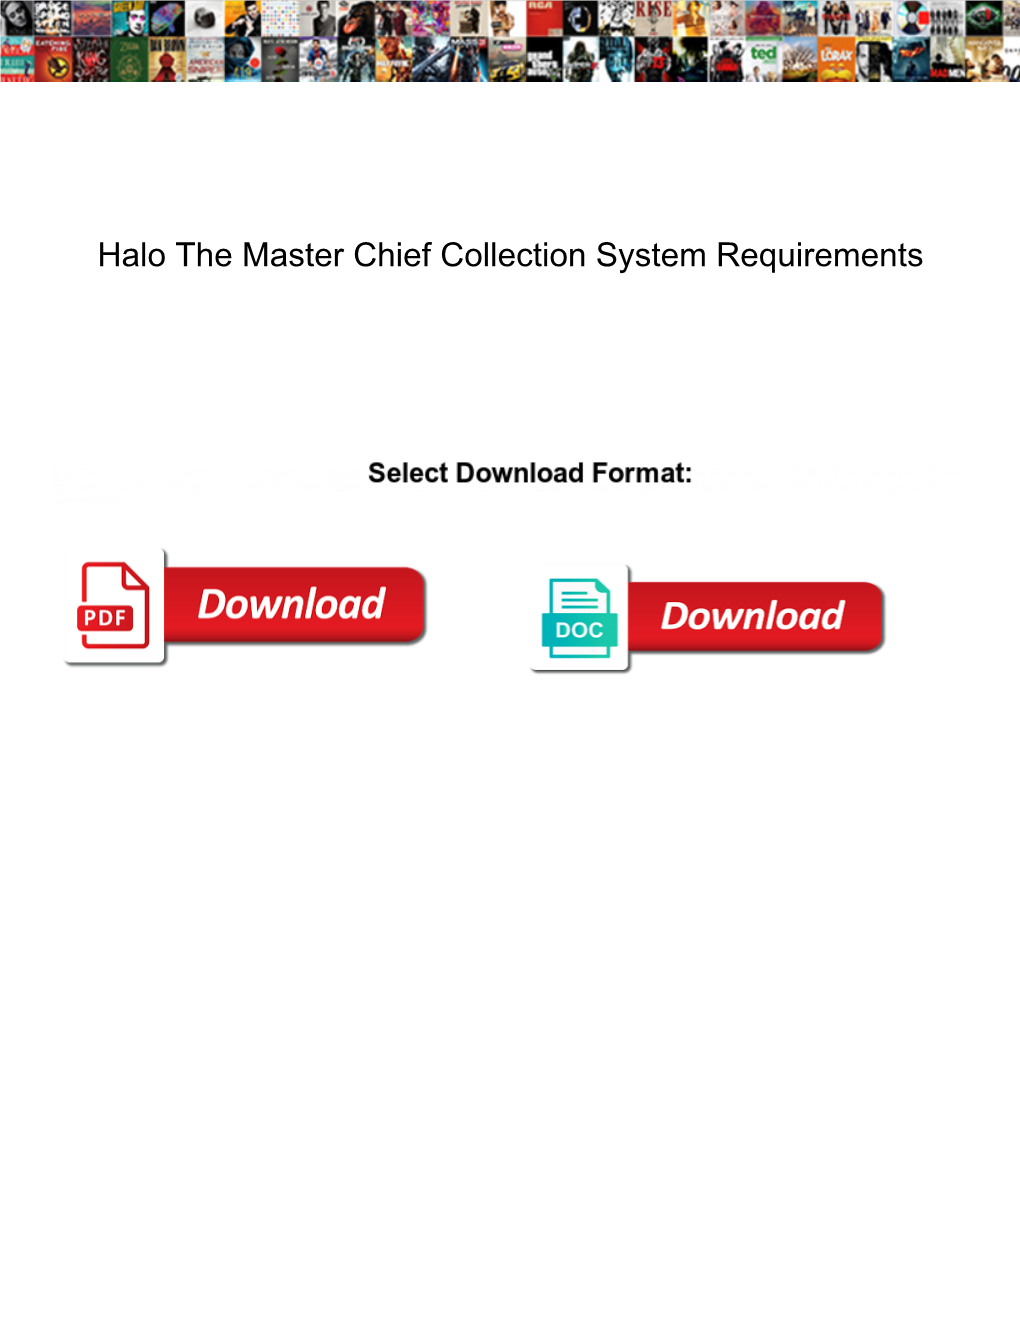 Halo the Master Chief Collection System Requirements